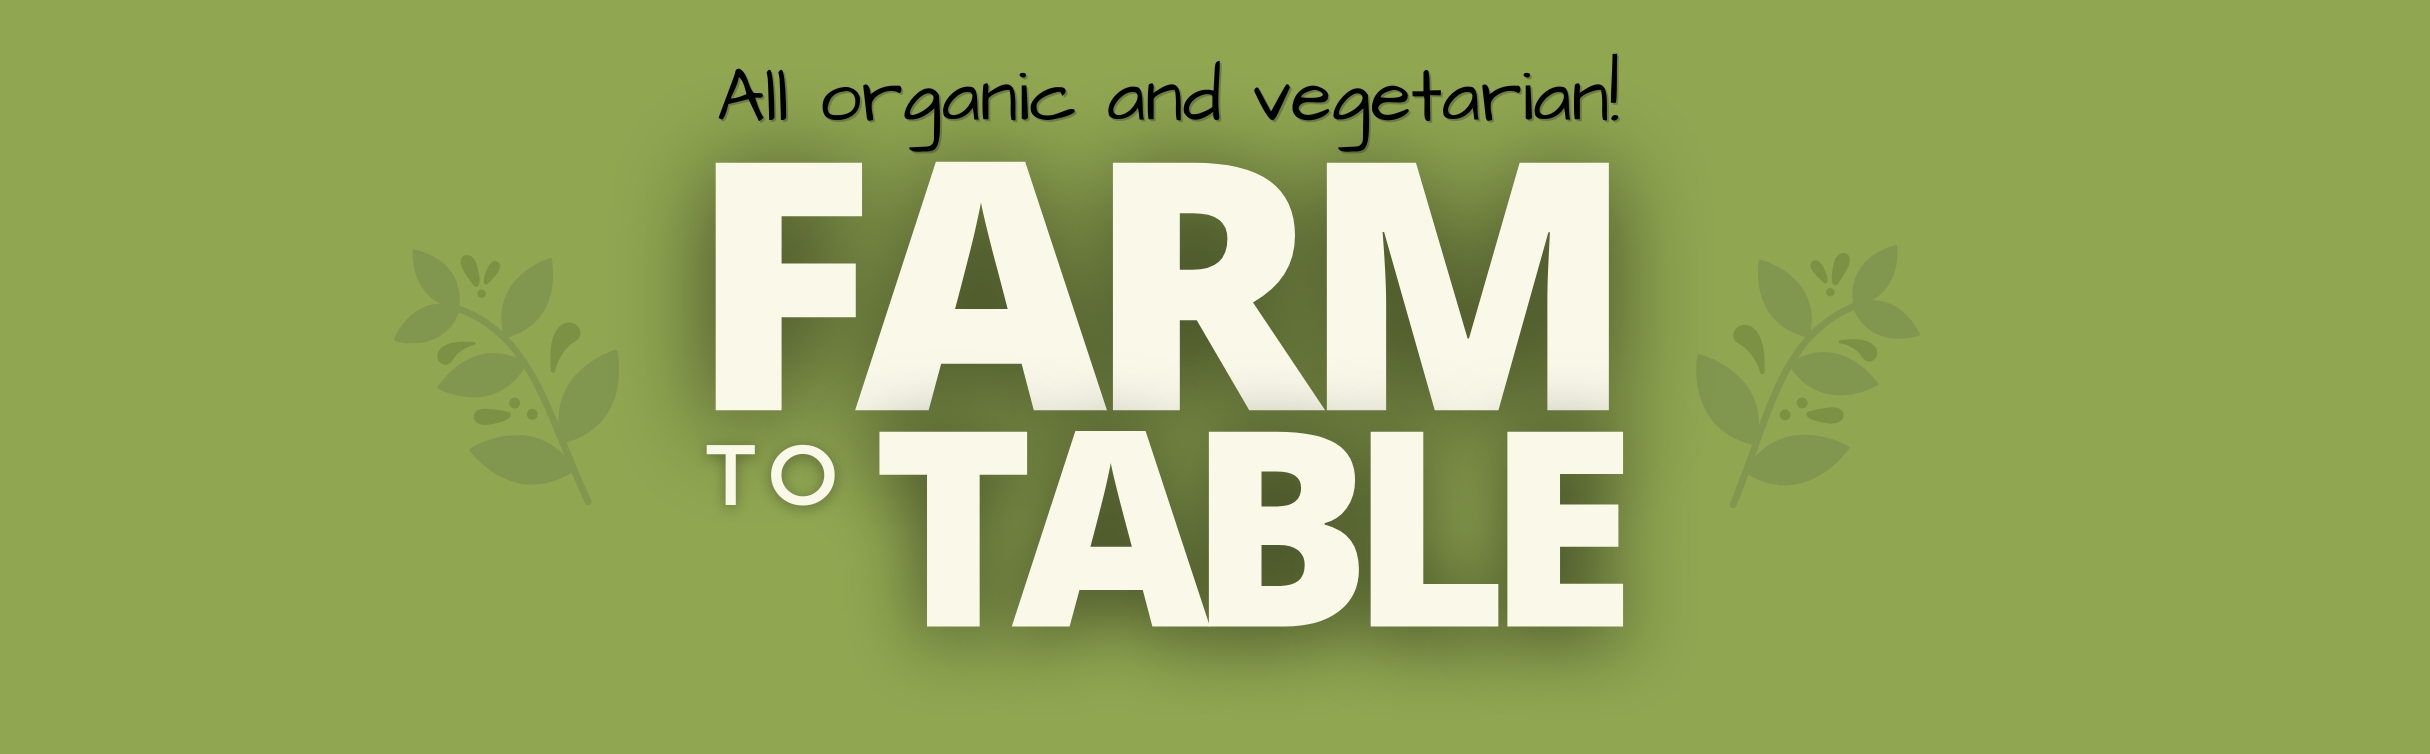 Farm to Table banner